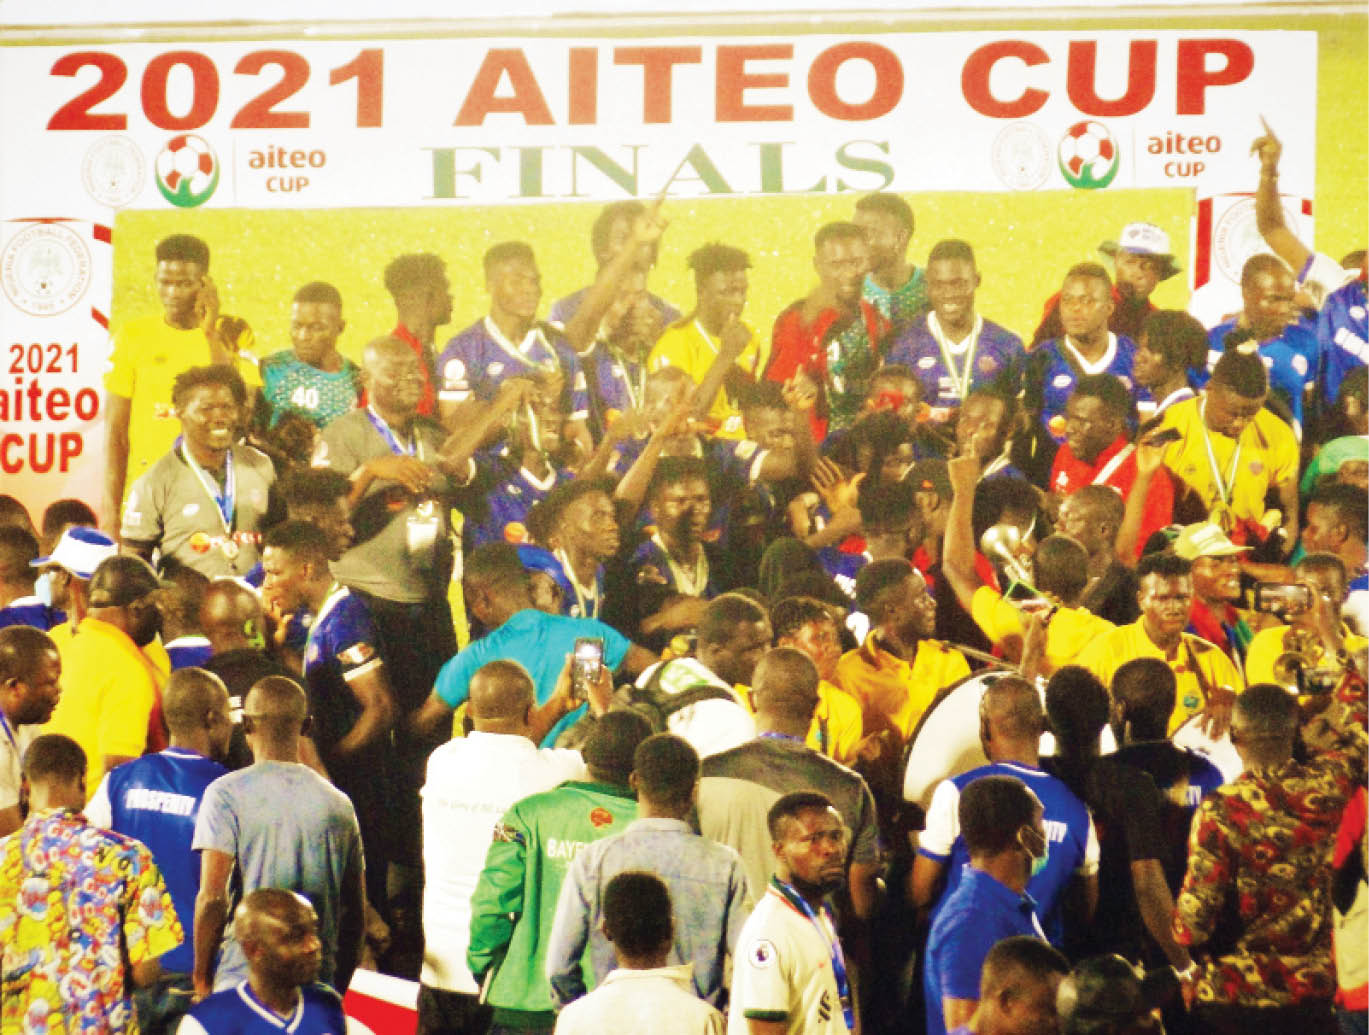 Players and officials of Bayelsa United celebrating Aiteo Cup victory over Nasarawa United yesterday in Benin City